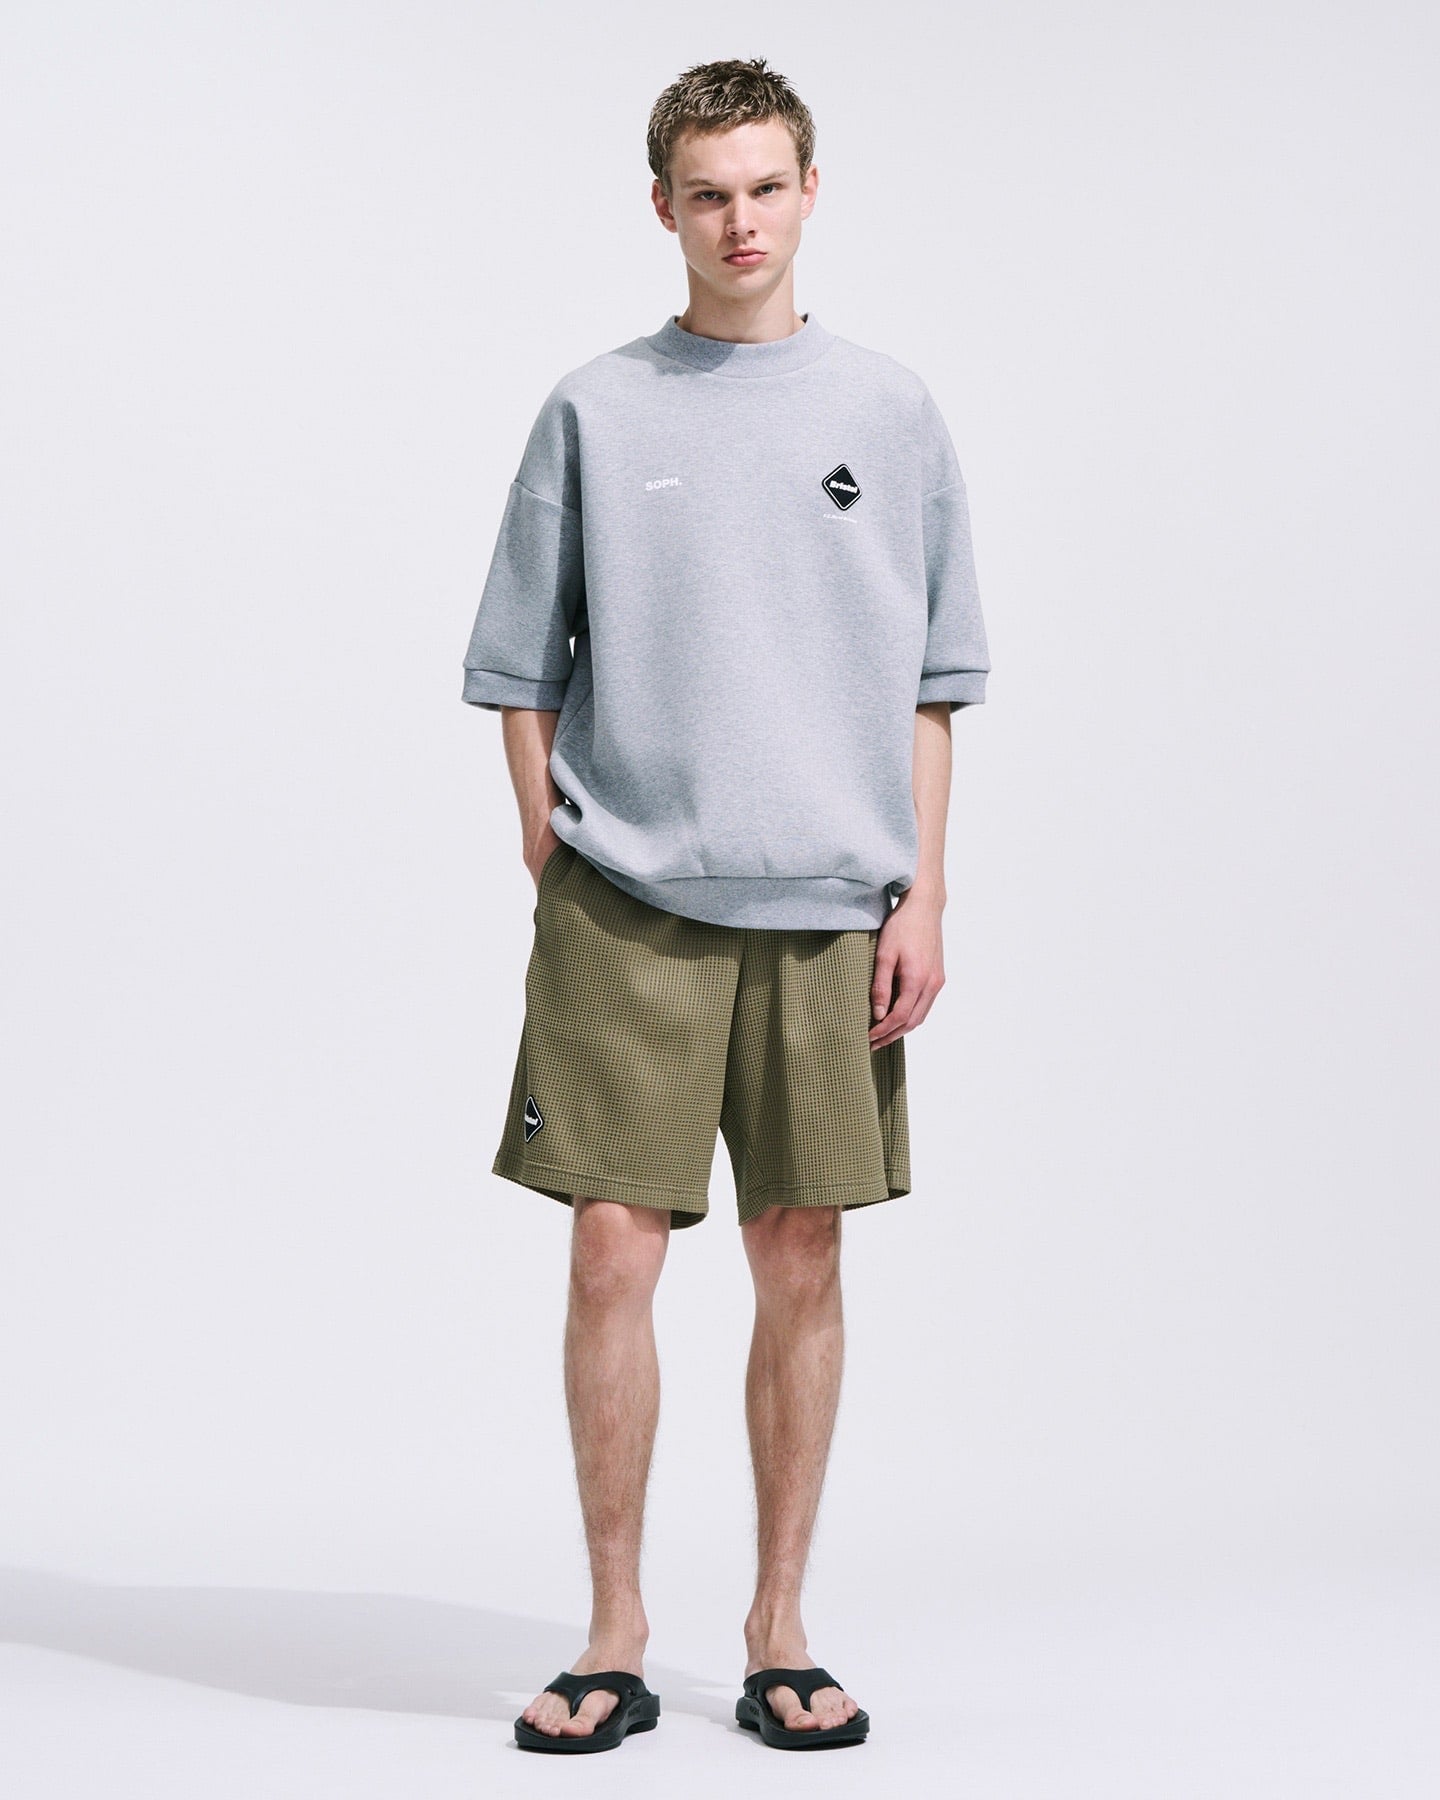 S TECH SWEAT TEAM BAGGY SHORTS fcrb 24ss - パンツ